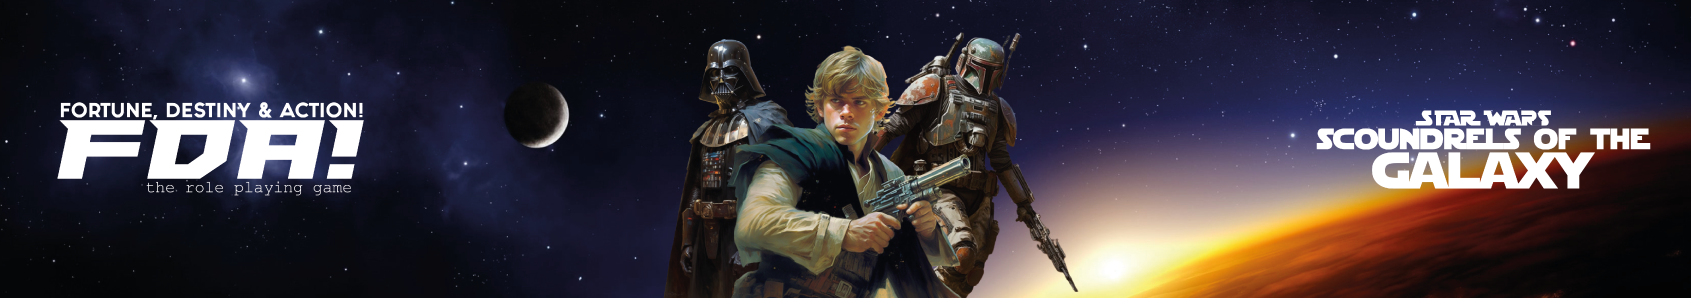 STAR WARS Scoundrels of the Galaxy - TTRPG!